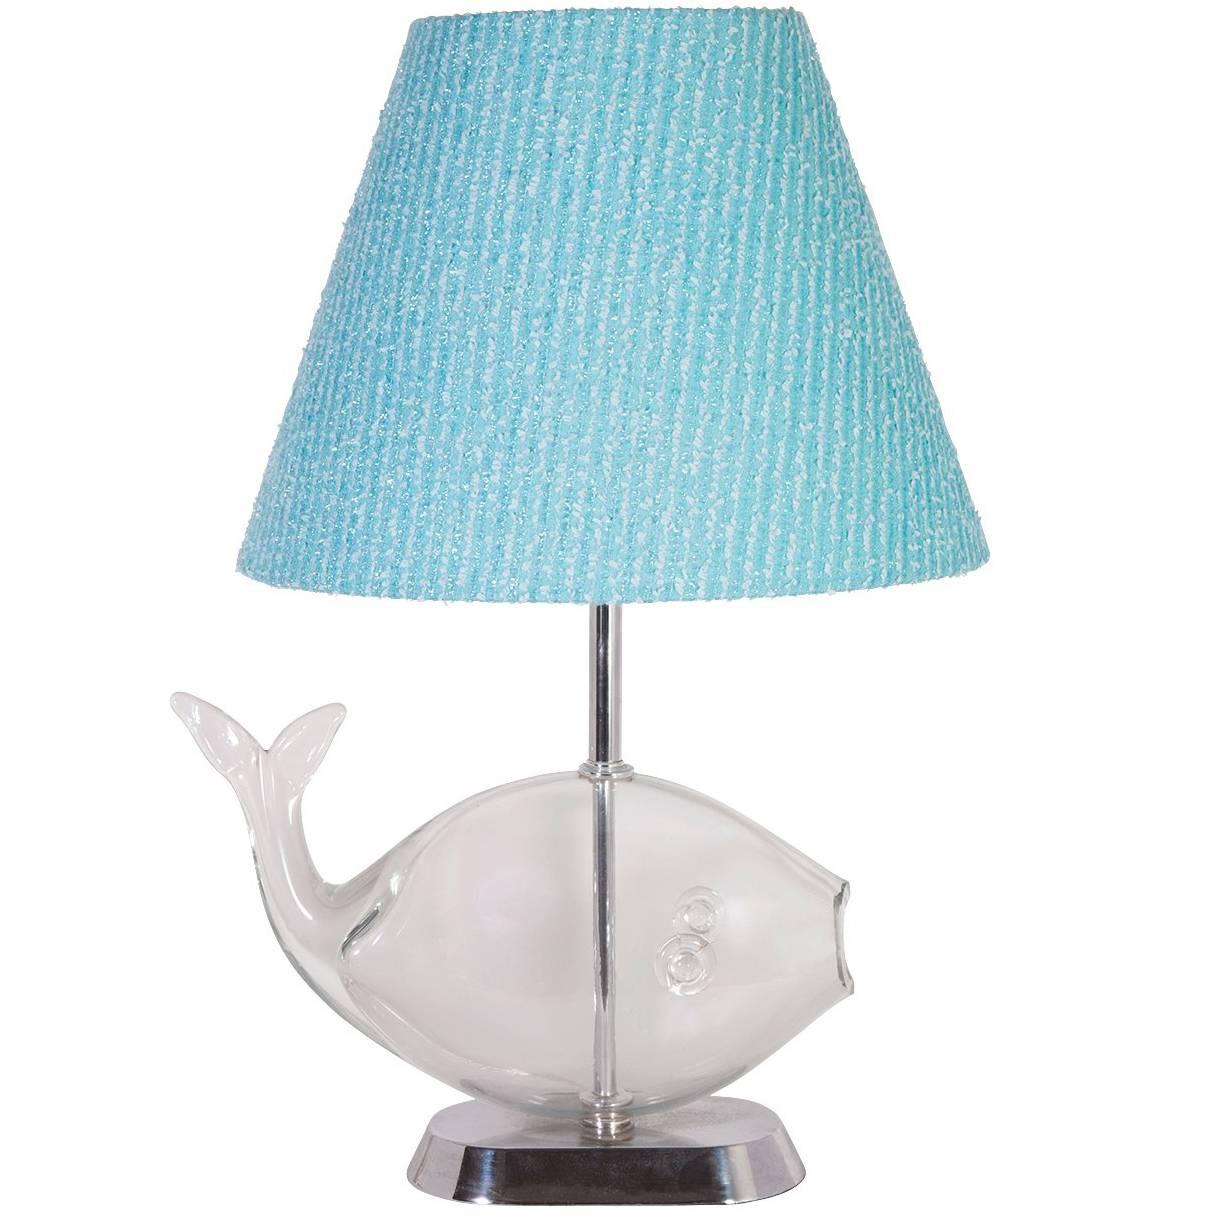 Glass Fish Table Lamp with Custom Blue Tweed Lampshade For Sale